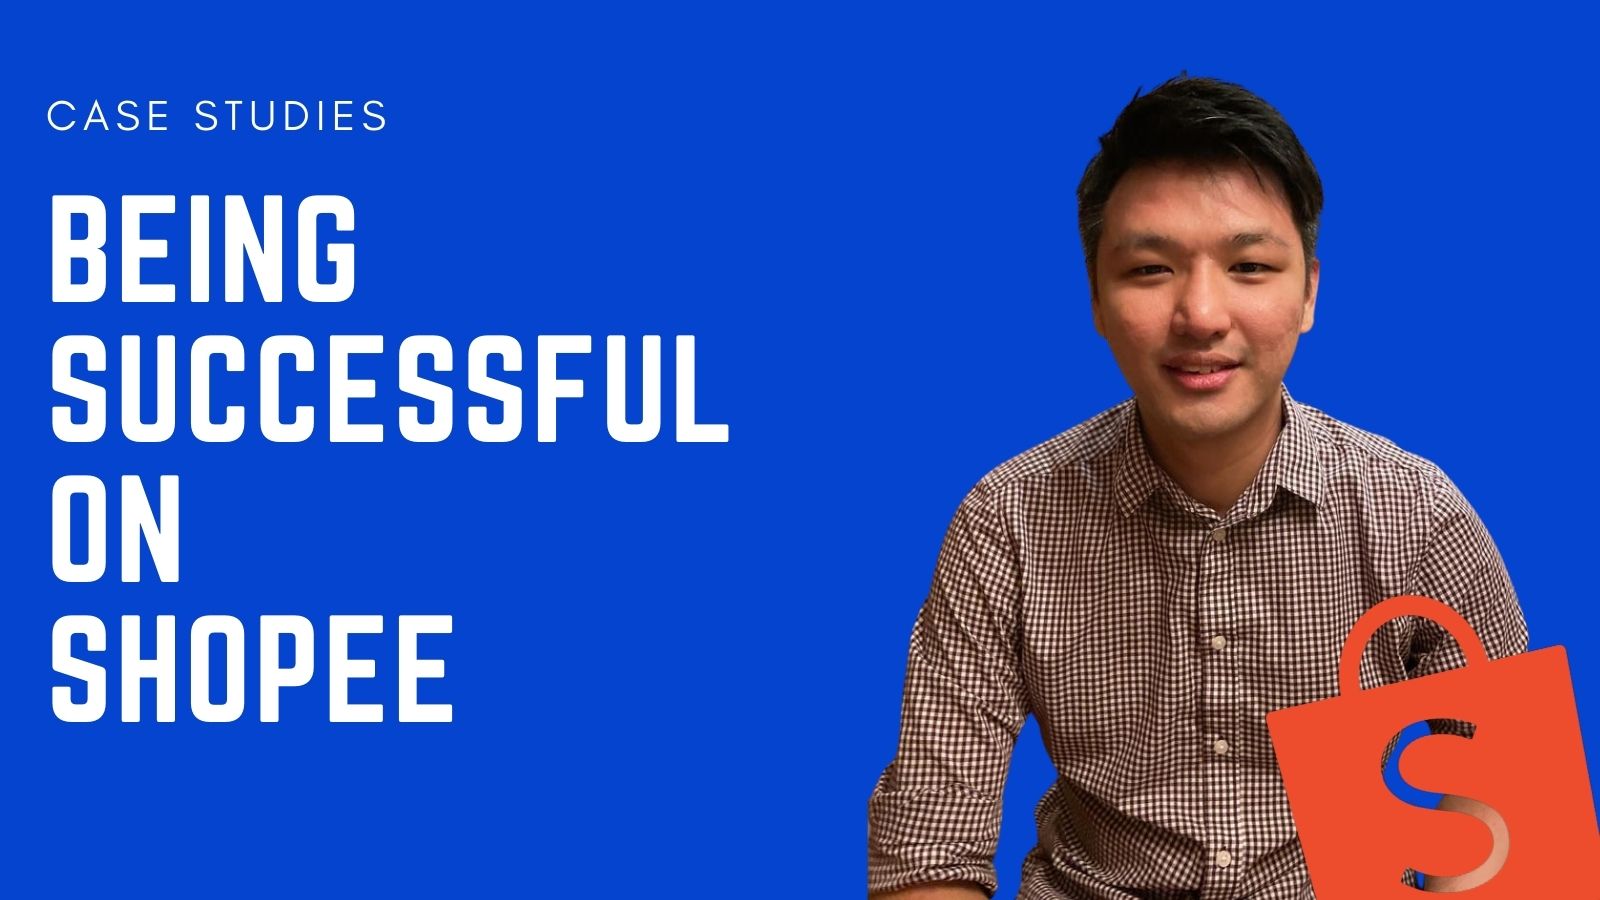 Learn from Thiam Lai, online seller in Singapore running 5 shopee stores